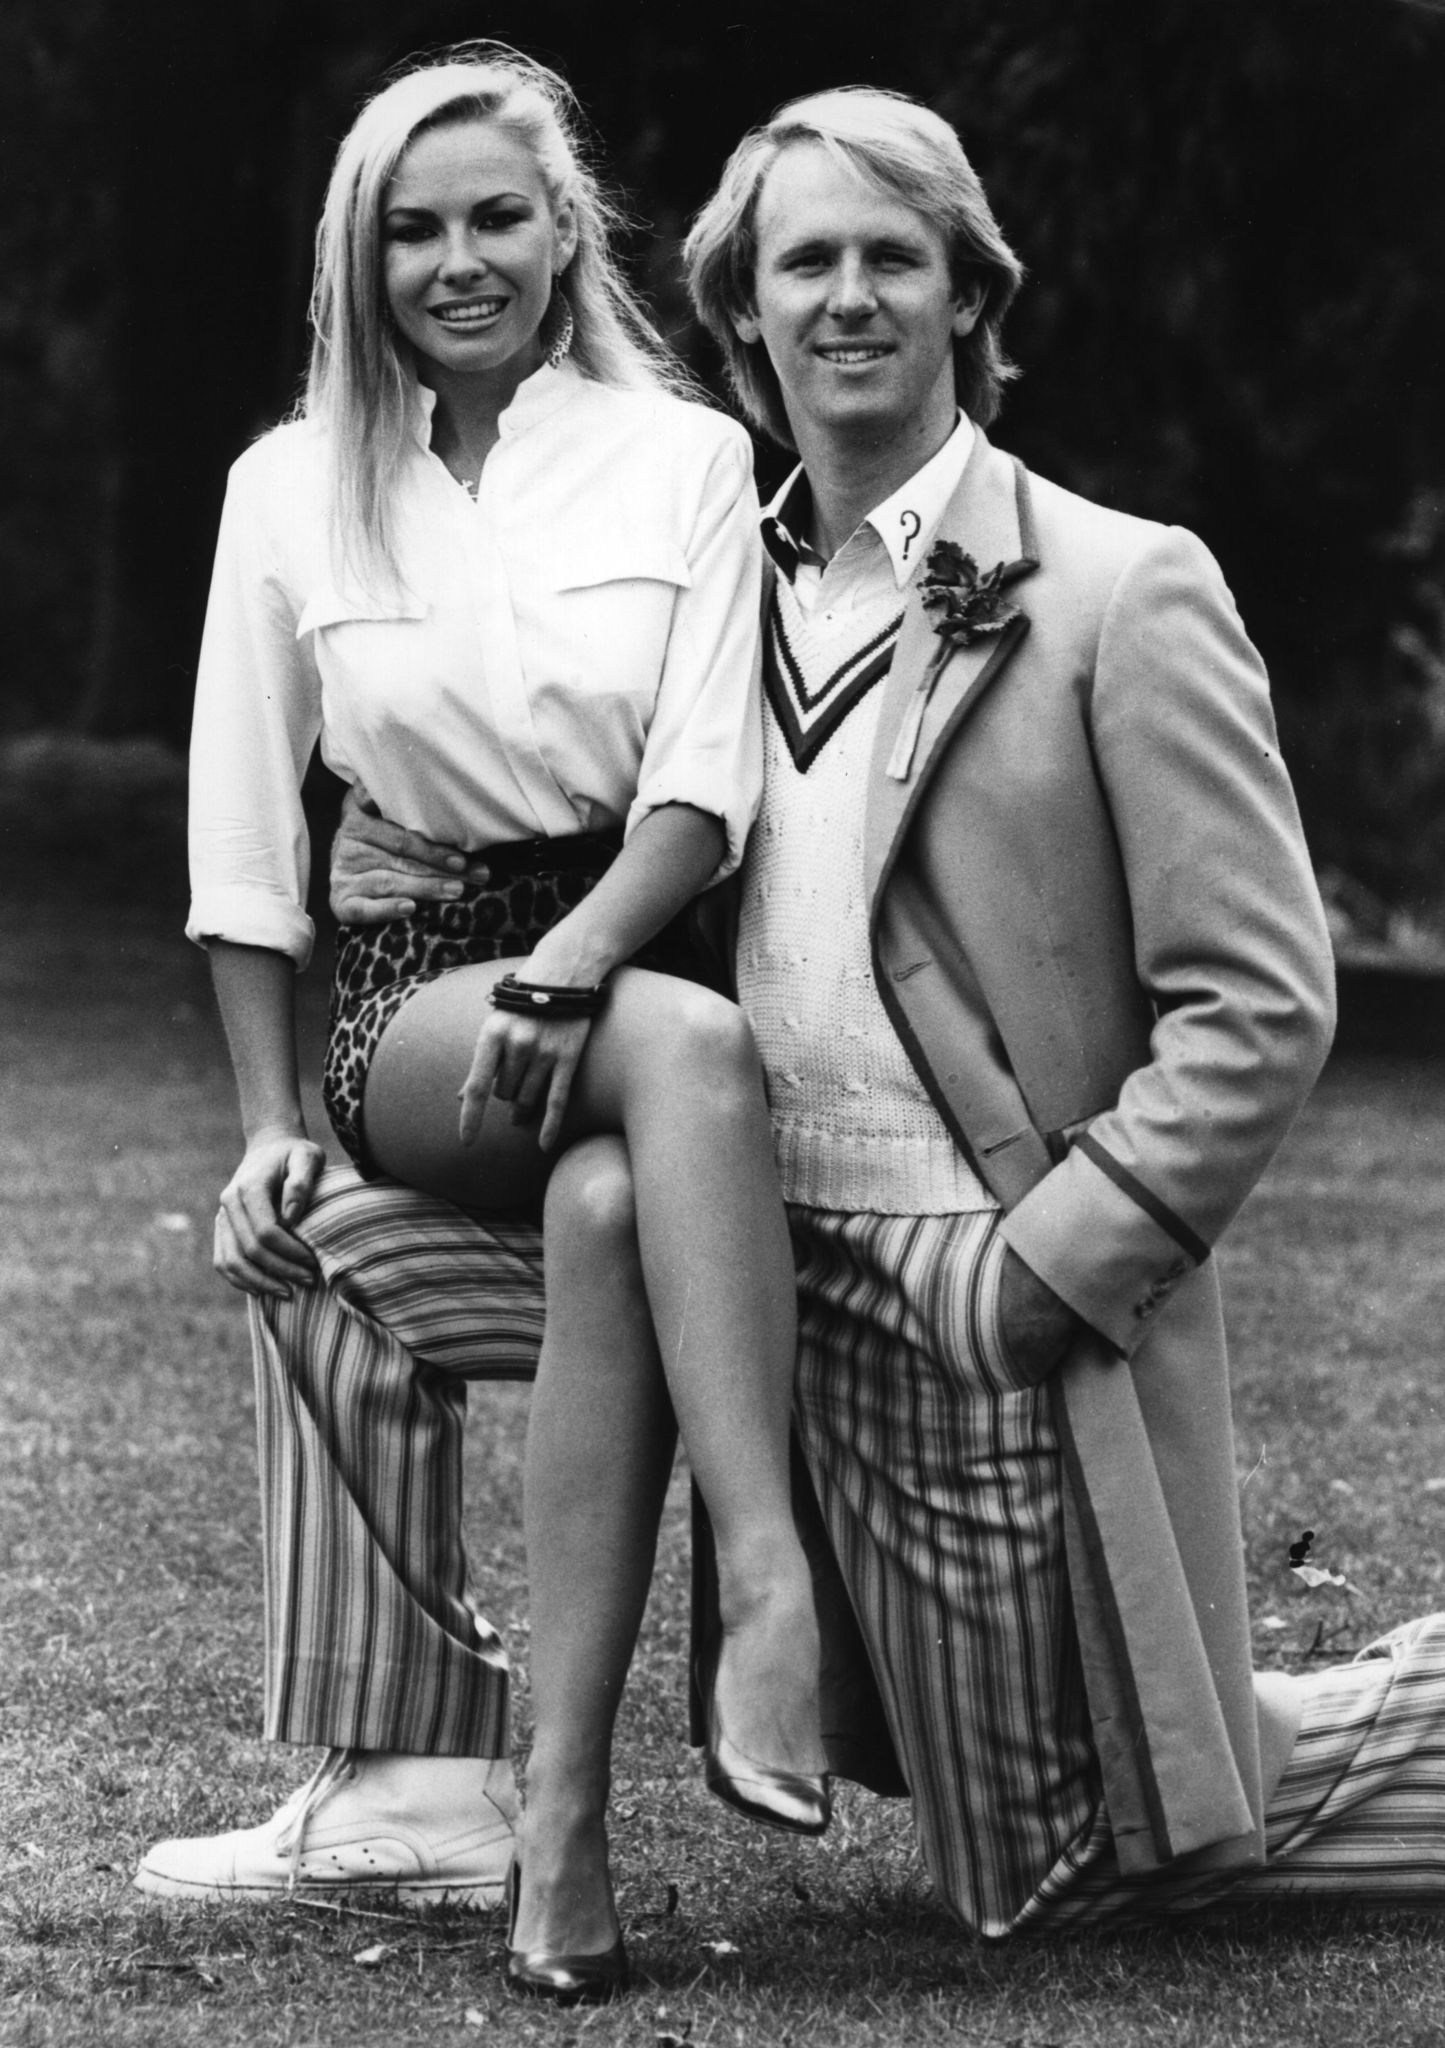 19th August 1981: Pamela Stephenson and Peter Davison, who plays Doctor Who, at the BBC Television Centre.